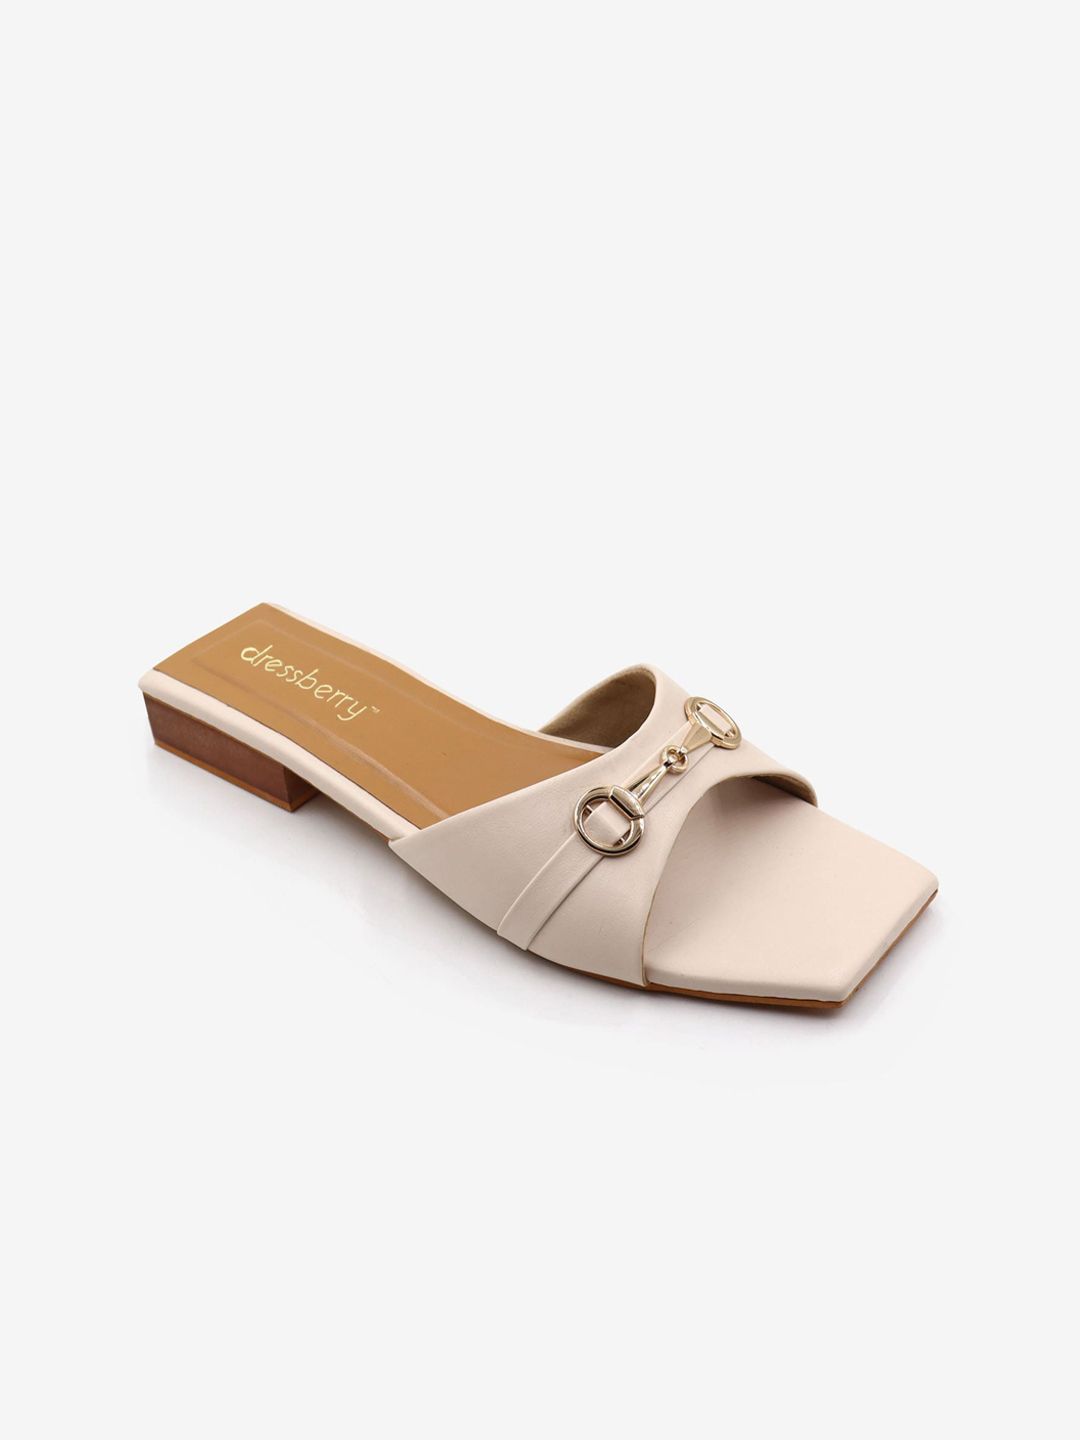 DressBerry Cream-Coloured And Gold-Toned Buckled Open Toe Flats Price in India